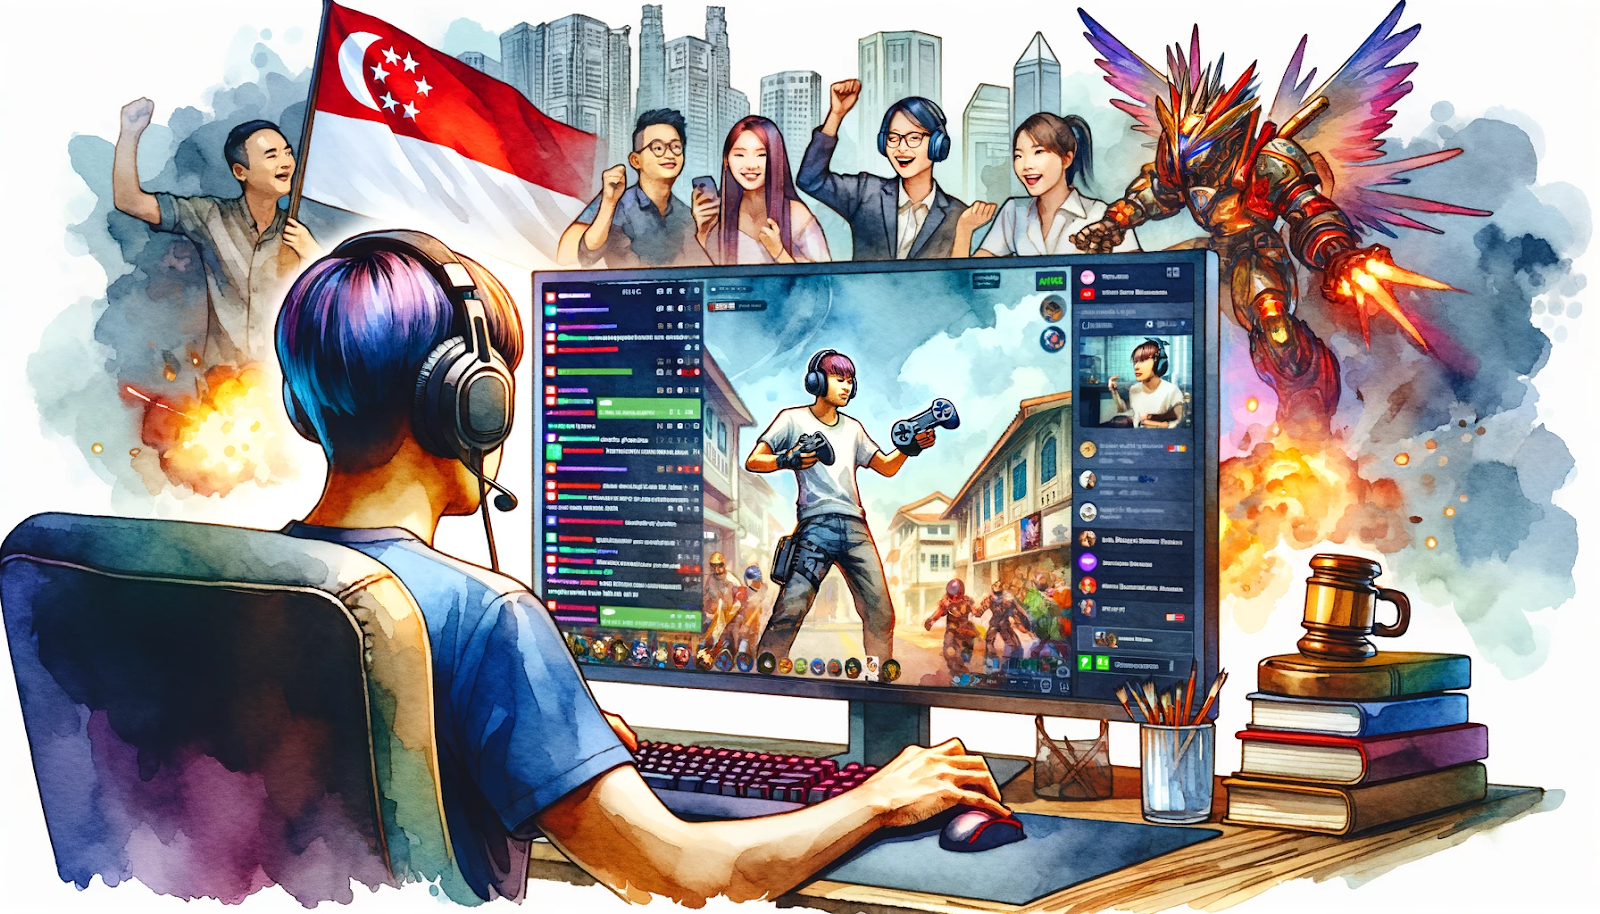 Game marketing strategies in singapore - A popular Singaporean gaming influencer, streaming a new game to a large online audience